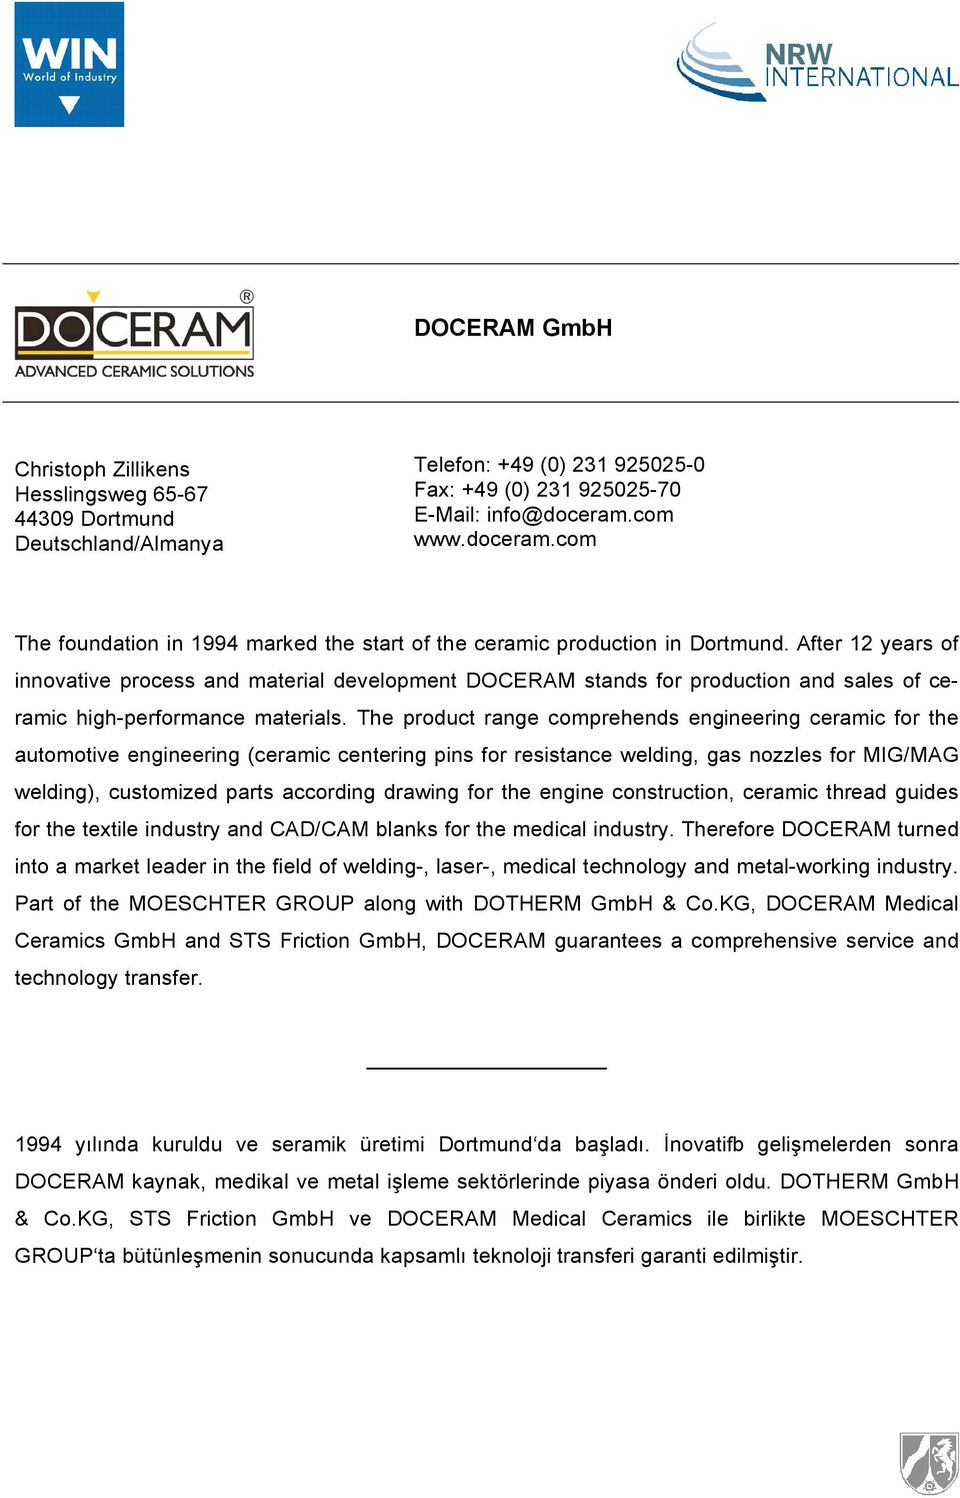 After 12 years of innovative process and material development DOCERAM stands for production and sales of ceramic high-performance materials.